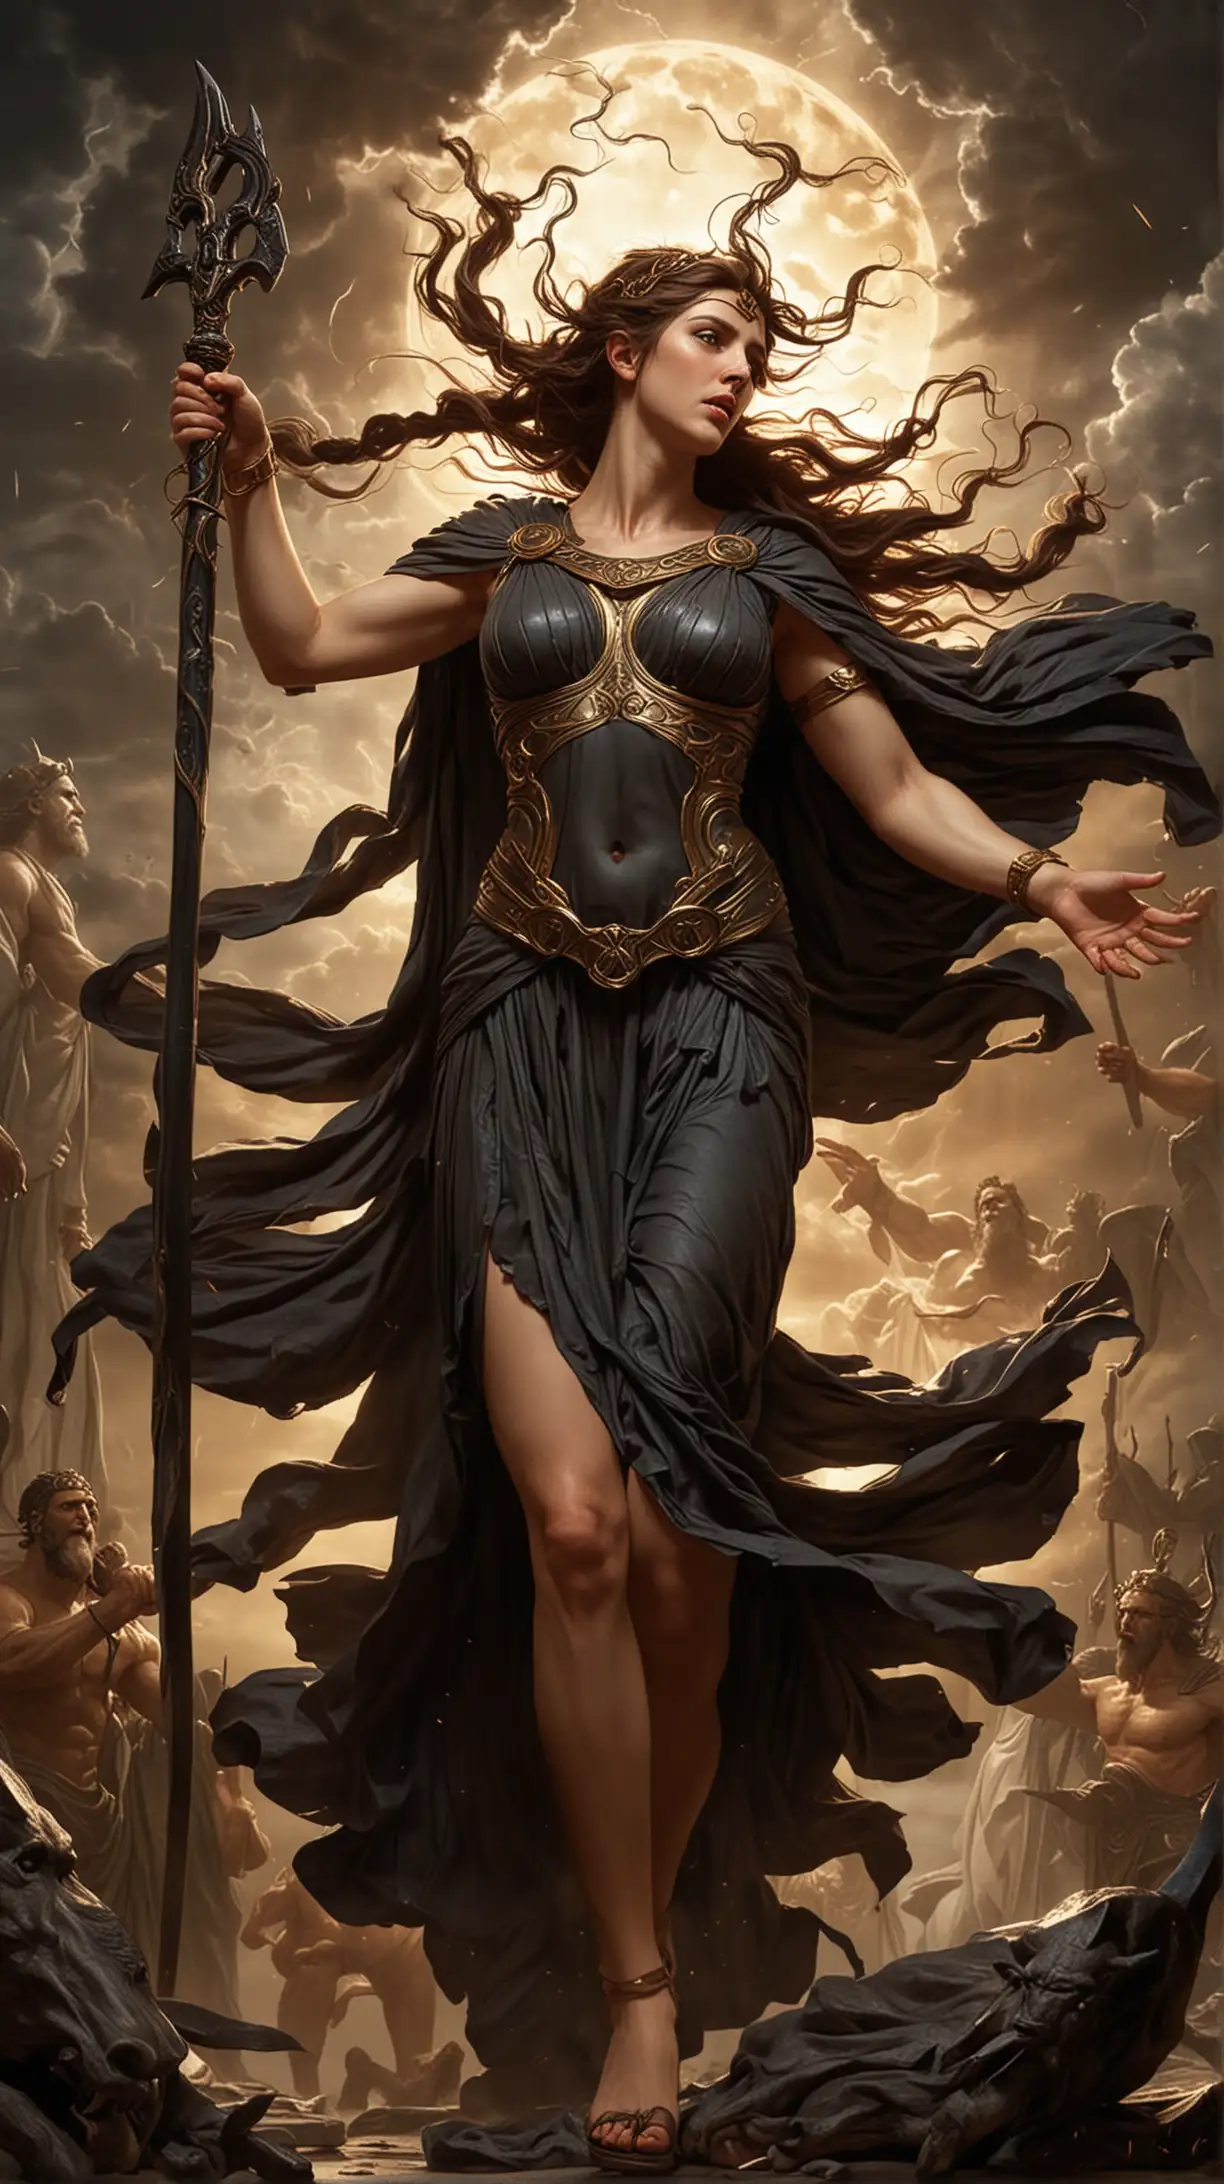 While some interpretations suggest Zeus feared Nyx, it's more accurate to say he respected her immense power and primordial status.  She wasn't a threat he could overpower, but rather a force of nature to be acknowledged.  The Iliad by Homer mentions Zeus being subdued by Nyx,  but it likely refers to the inevitable arrival of nighttime rather than physical fear.